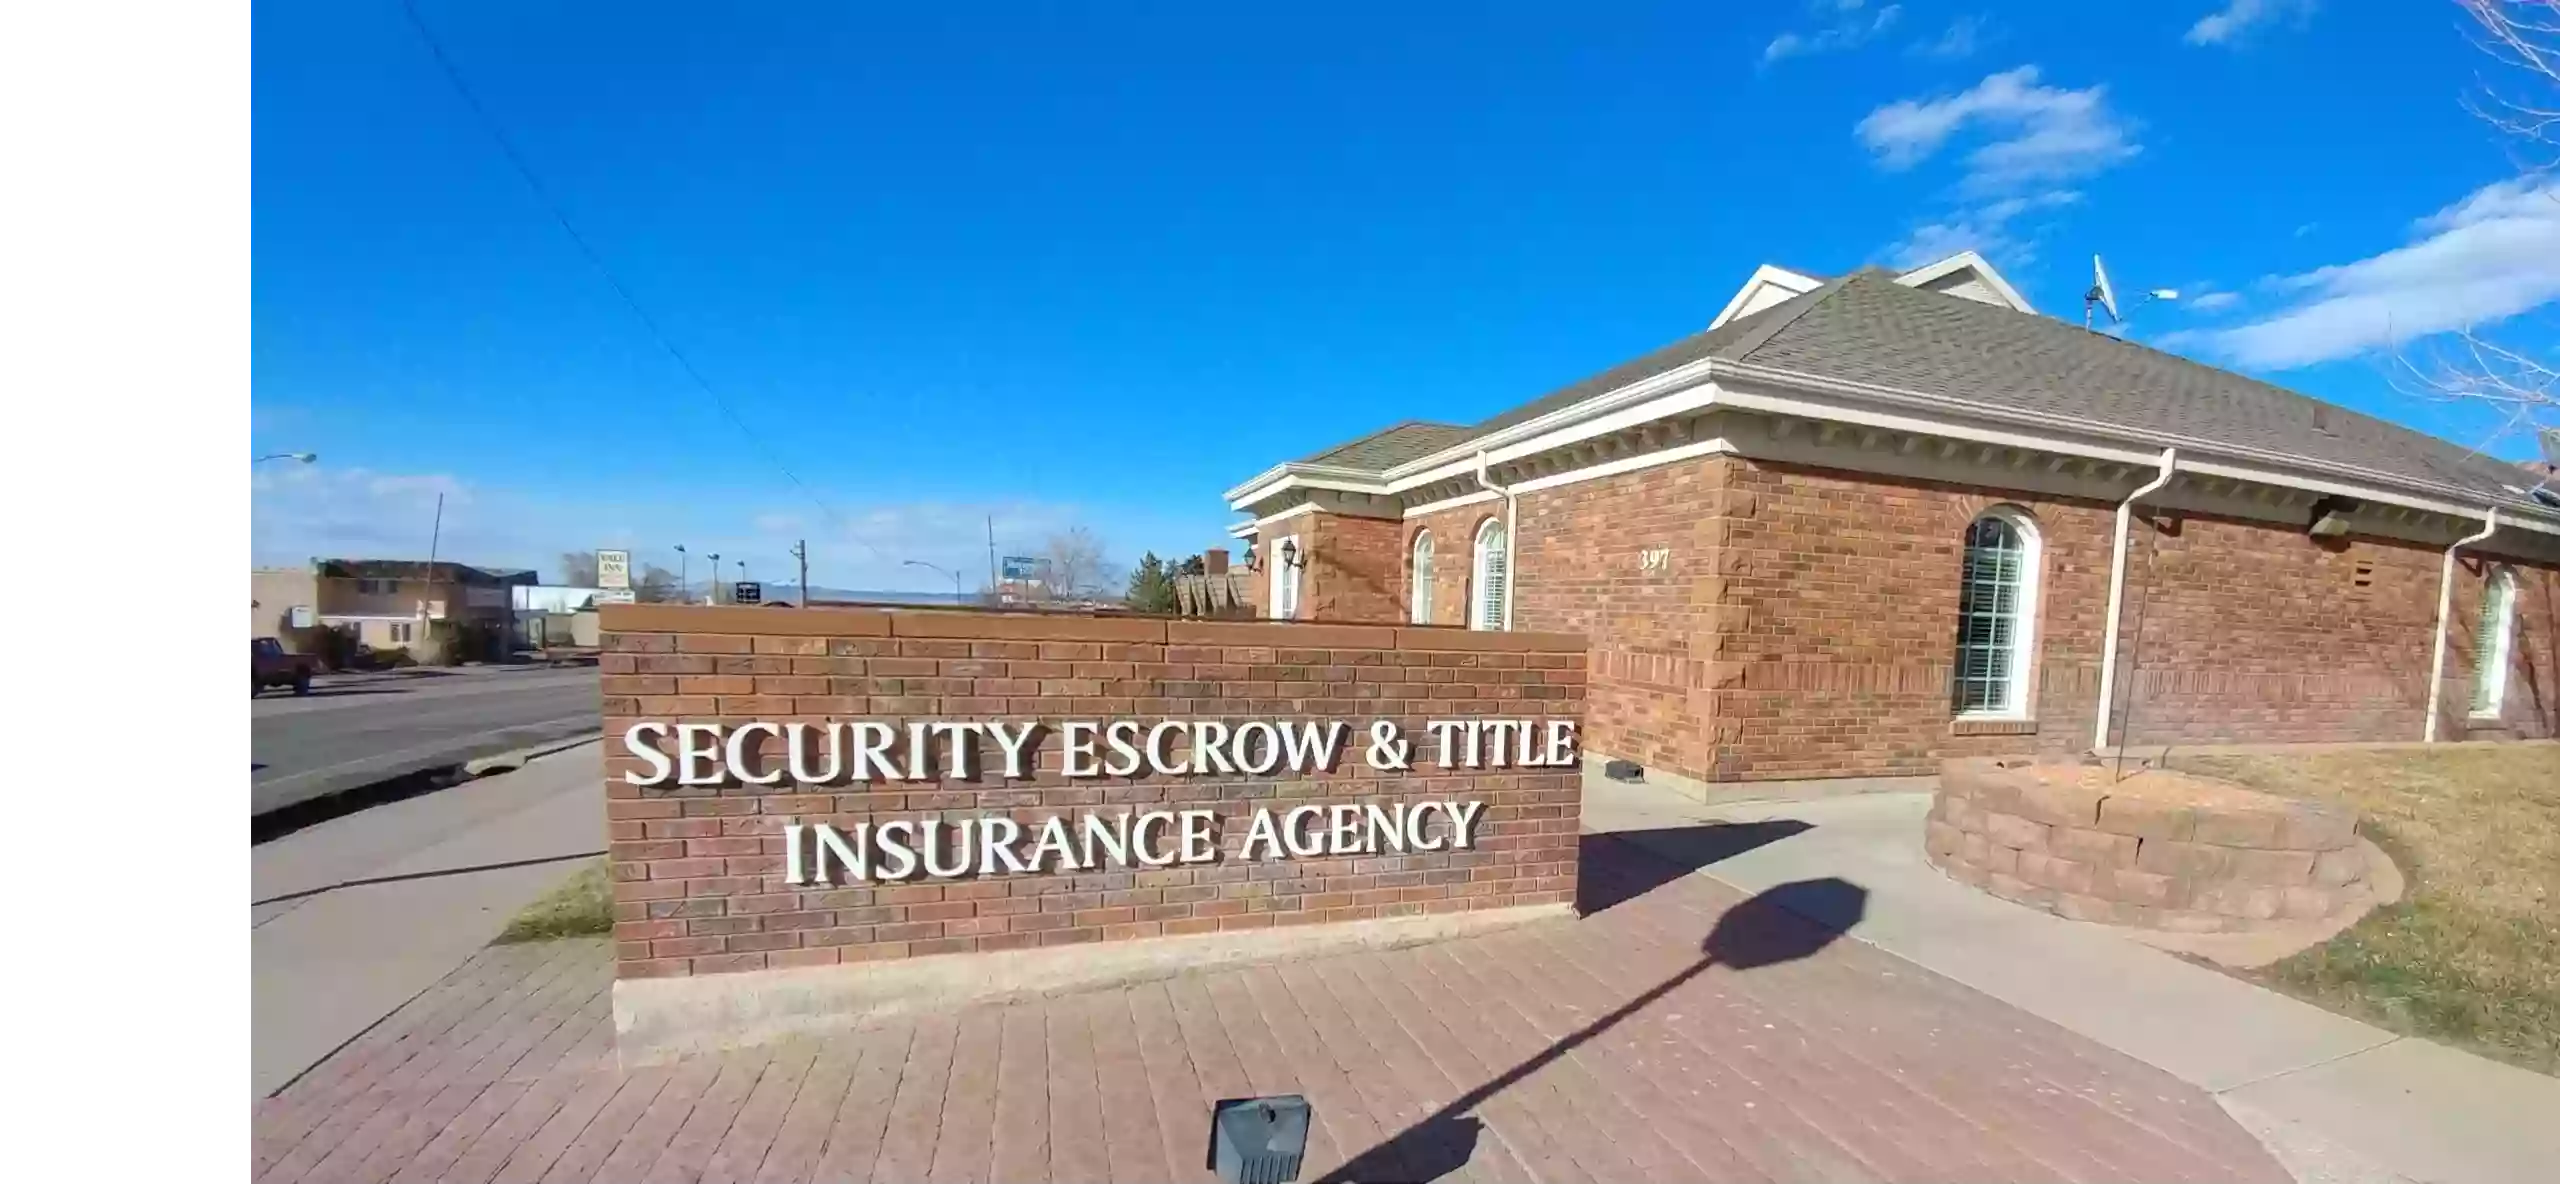 Security Escrow & Title Insurance Agency